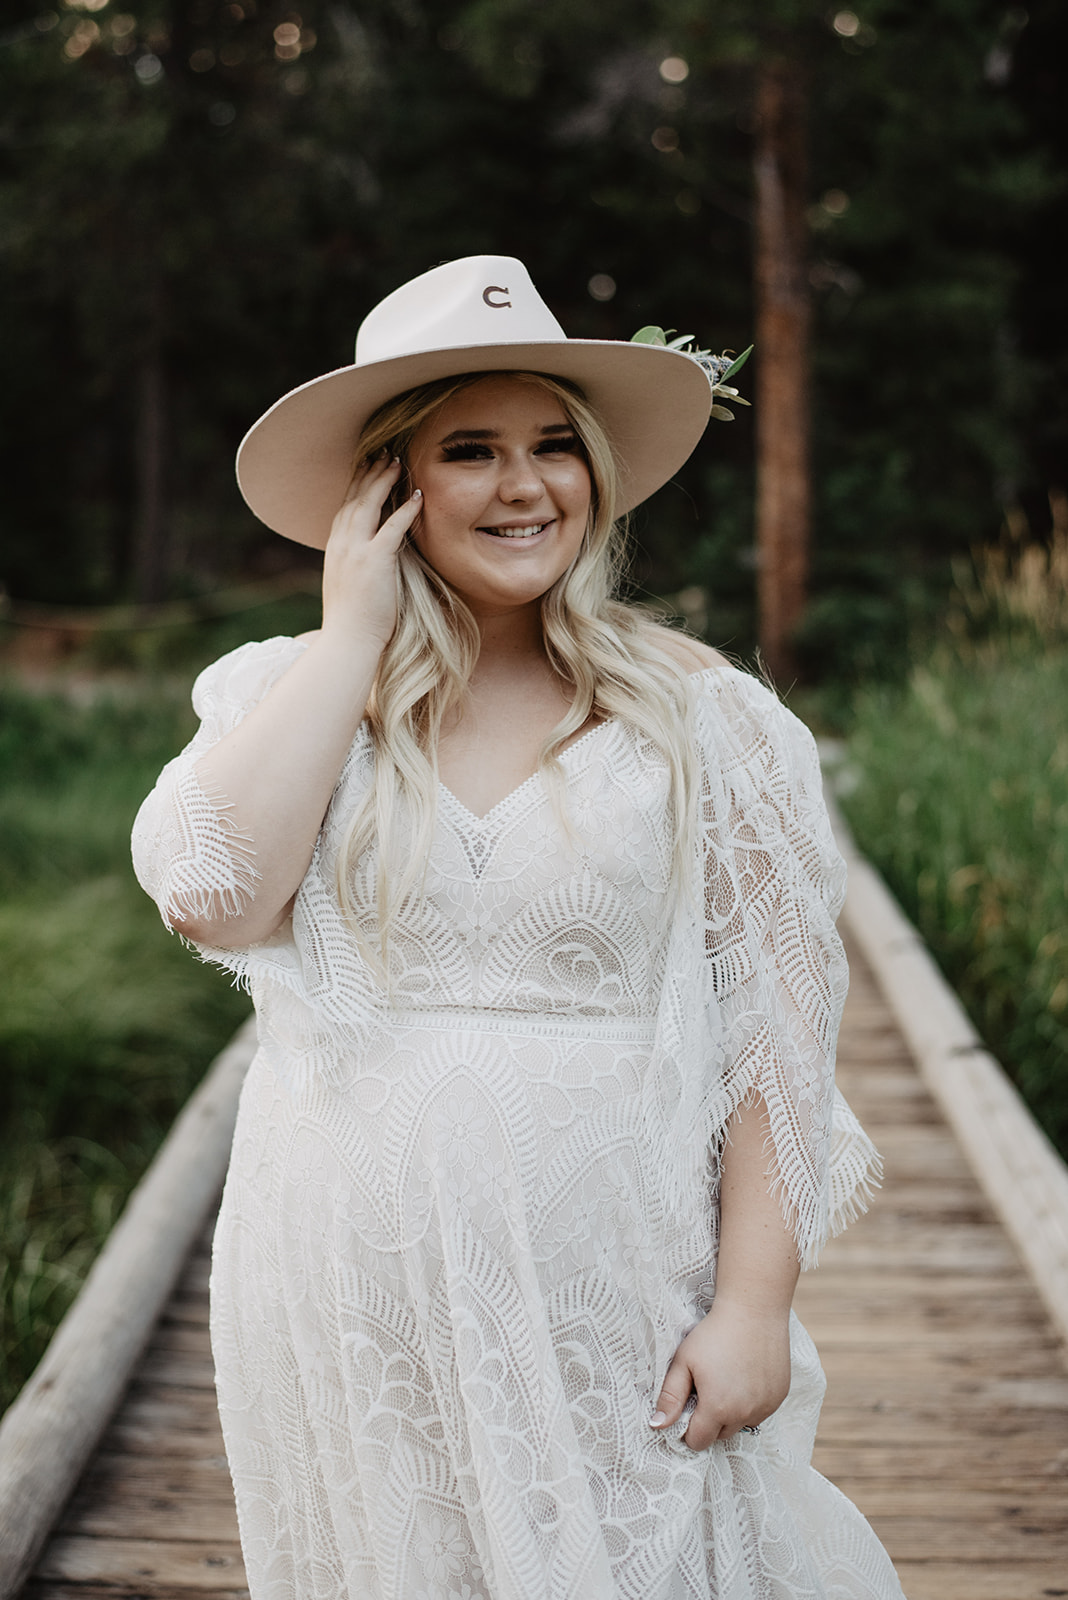 2022 wedding dresses with bride in a boho wedding dress and a cute wide brimmed hat smiling as she touches her hair in the Grand Tetons